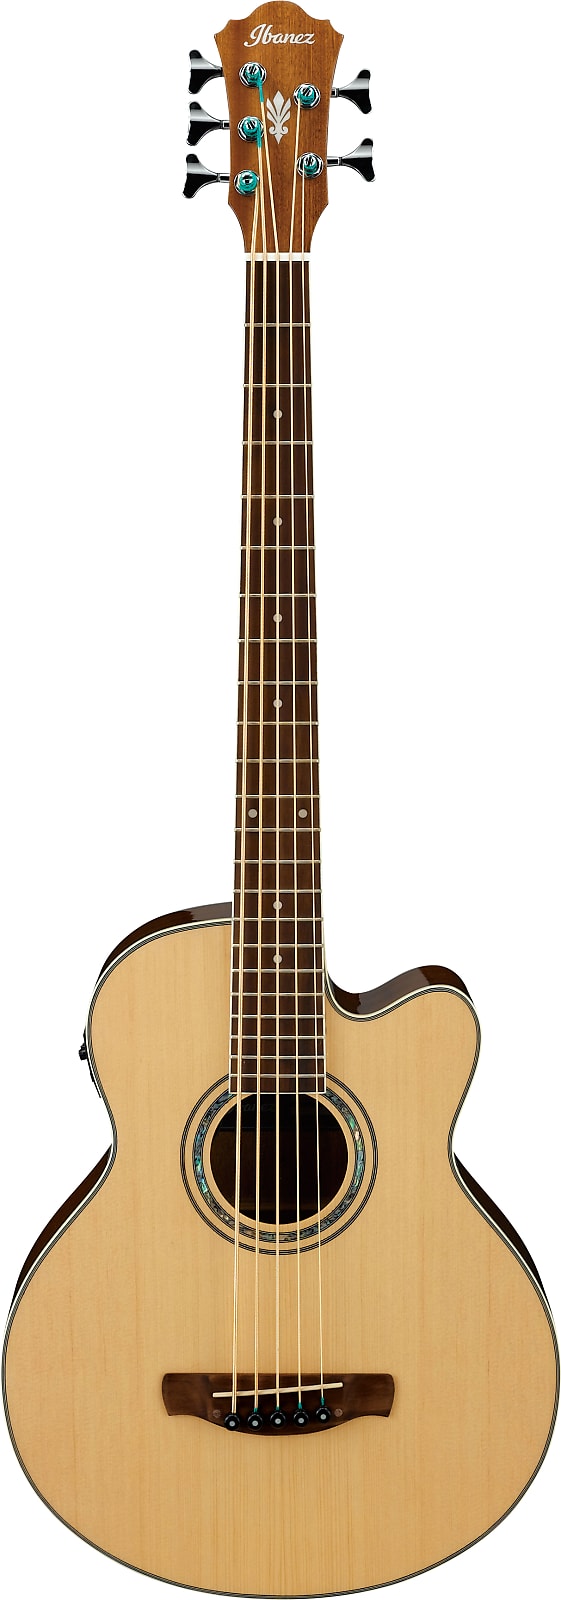 Ibanez AEB105E 5-String Acoustic Electric Bass Guitar Natural High Gloss